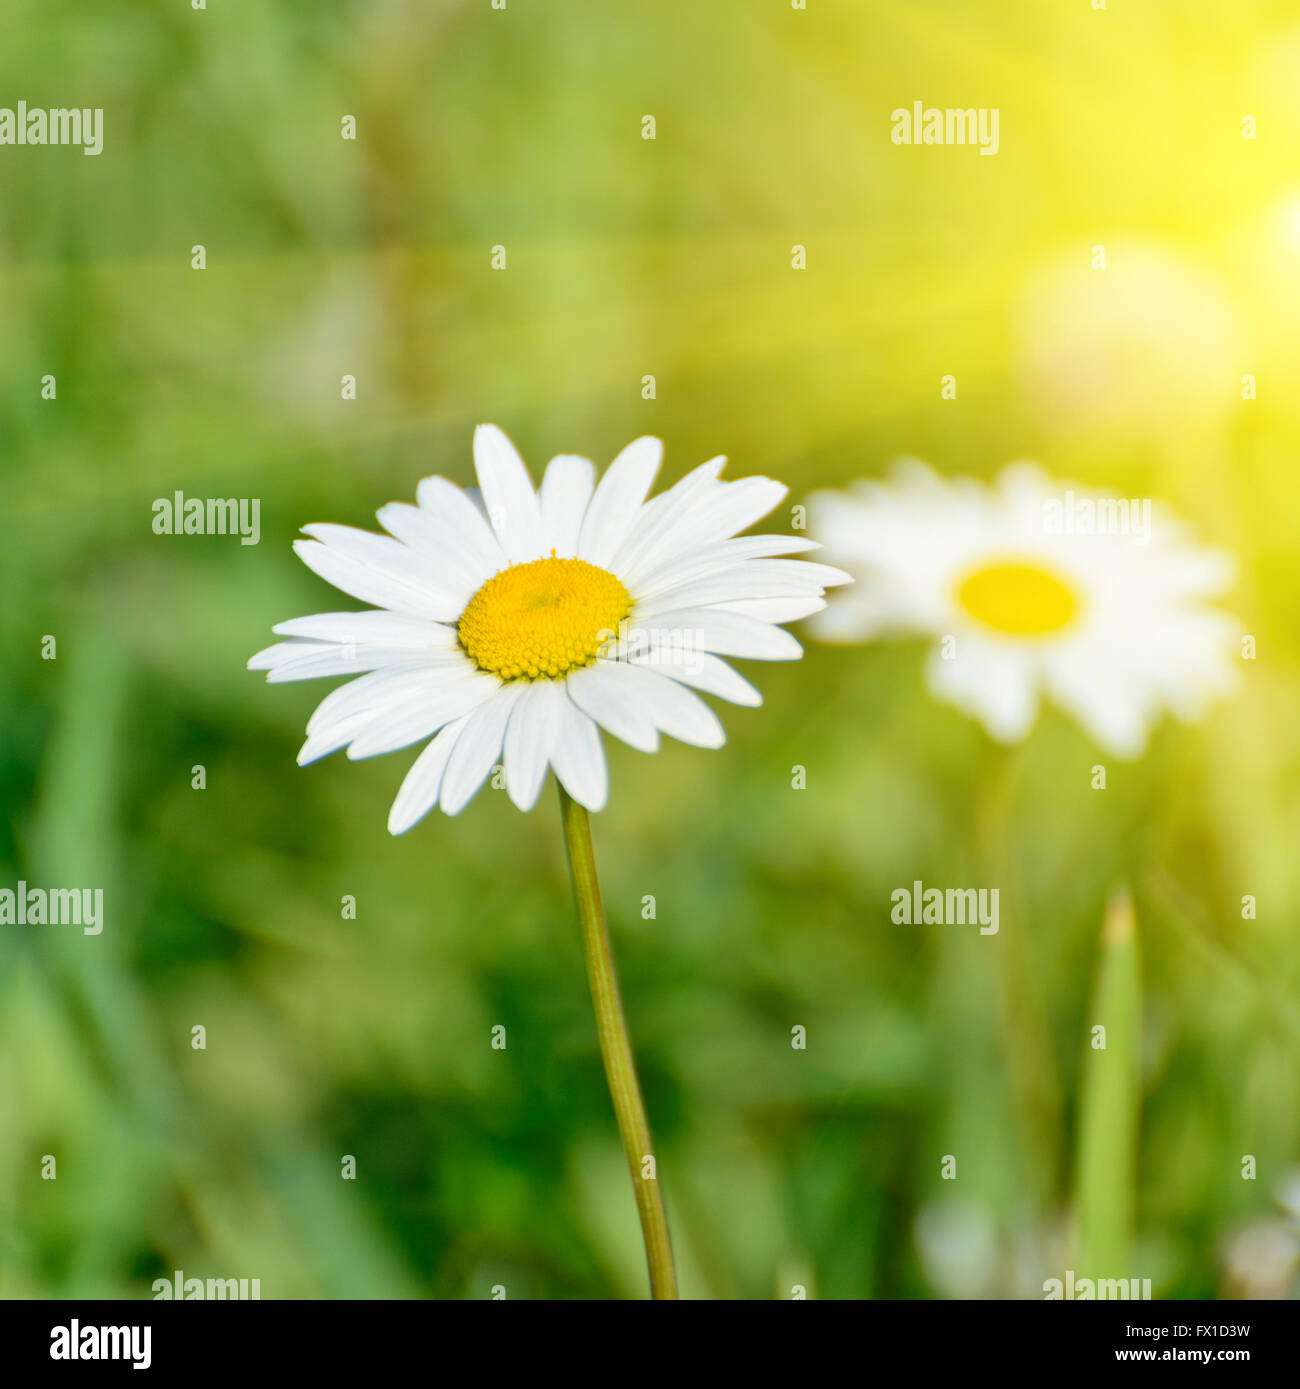 Floral nature daisy abstract background in green and yellow Stock Photo